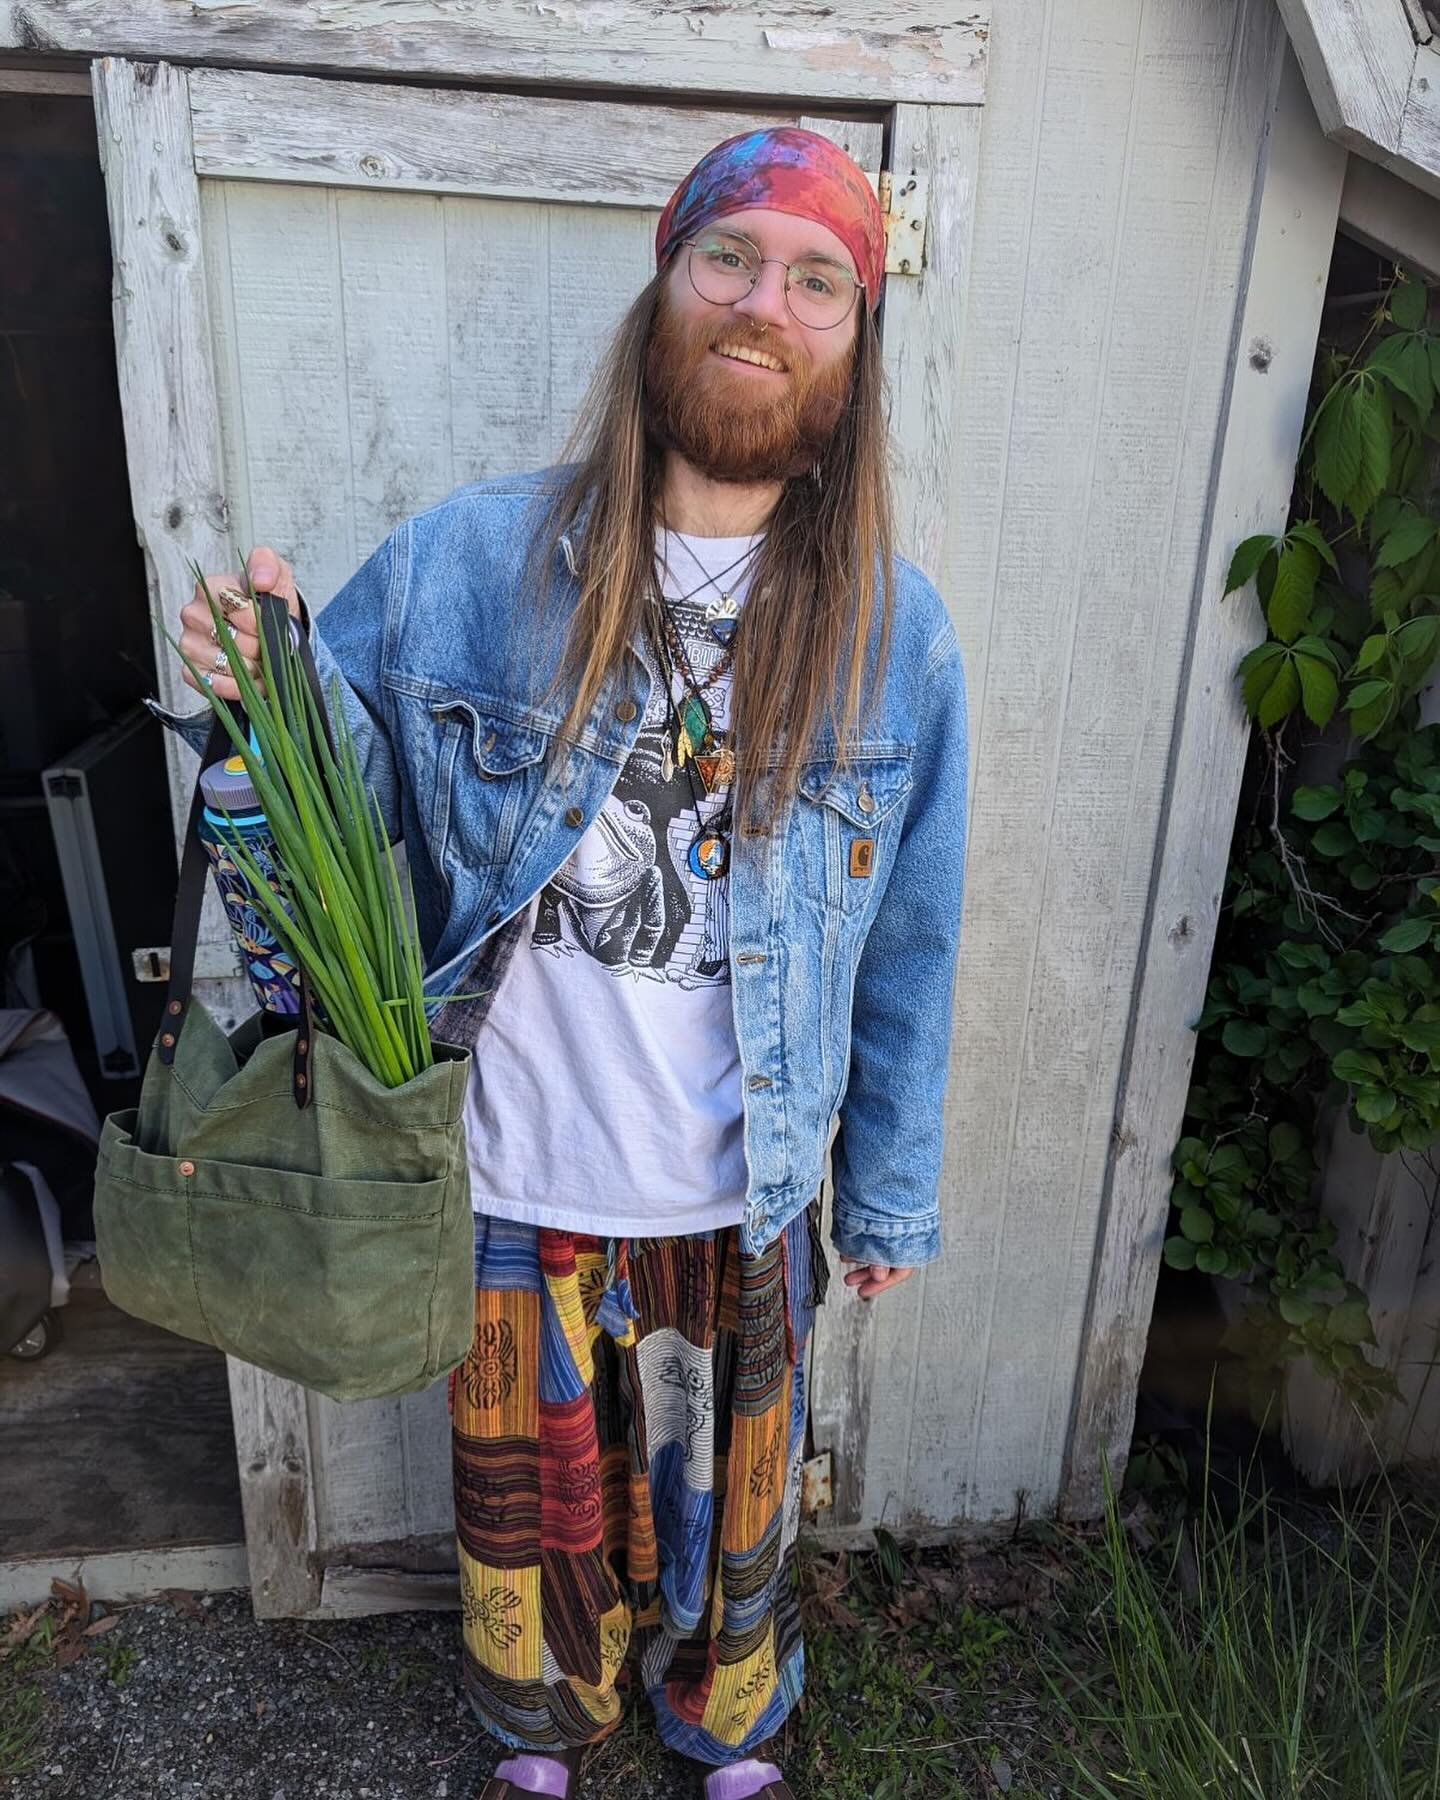 🌟 Fashion Spotlight: Meet Dane (@yourfriends.band), the epitome of style at the farmers&rsquo; market this week! Sporting a vibrant ensemble that lights up the market scene, Dane effortlessly blends urban chic with rural charm. His colorful outfit p